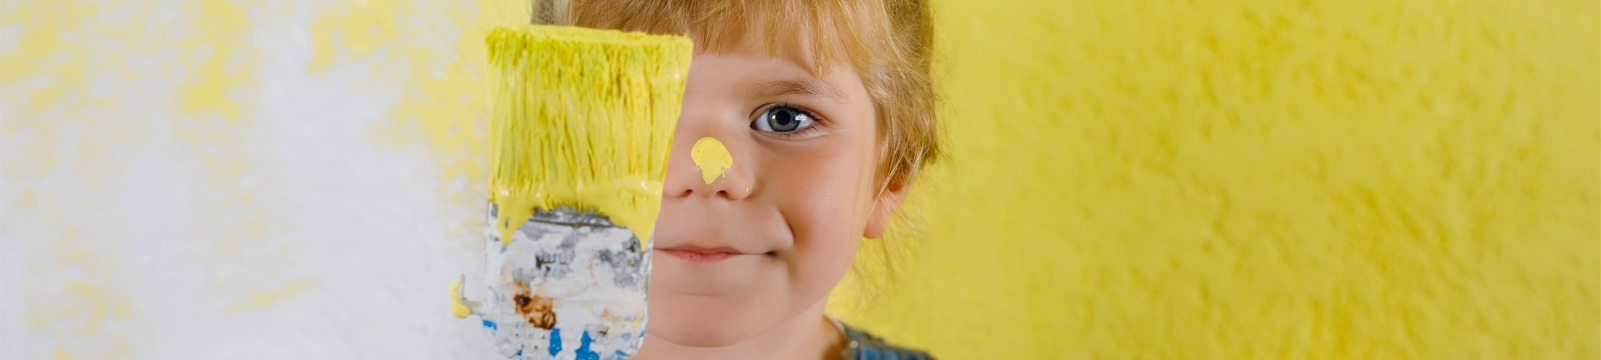 image of cute young blond girl "helping" paint a room a bright, cheerful yellow. She's holding a paintbrush dripping down her arm. Has a big splotch of yellow on nose.